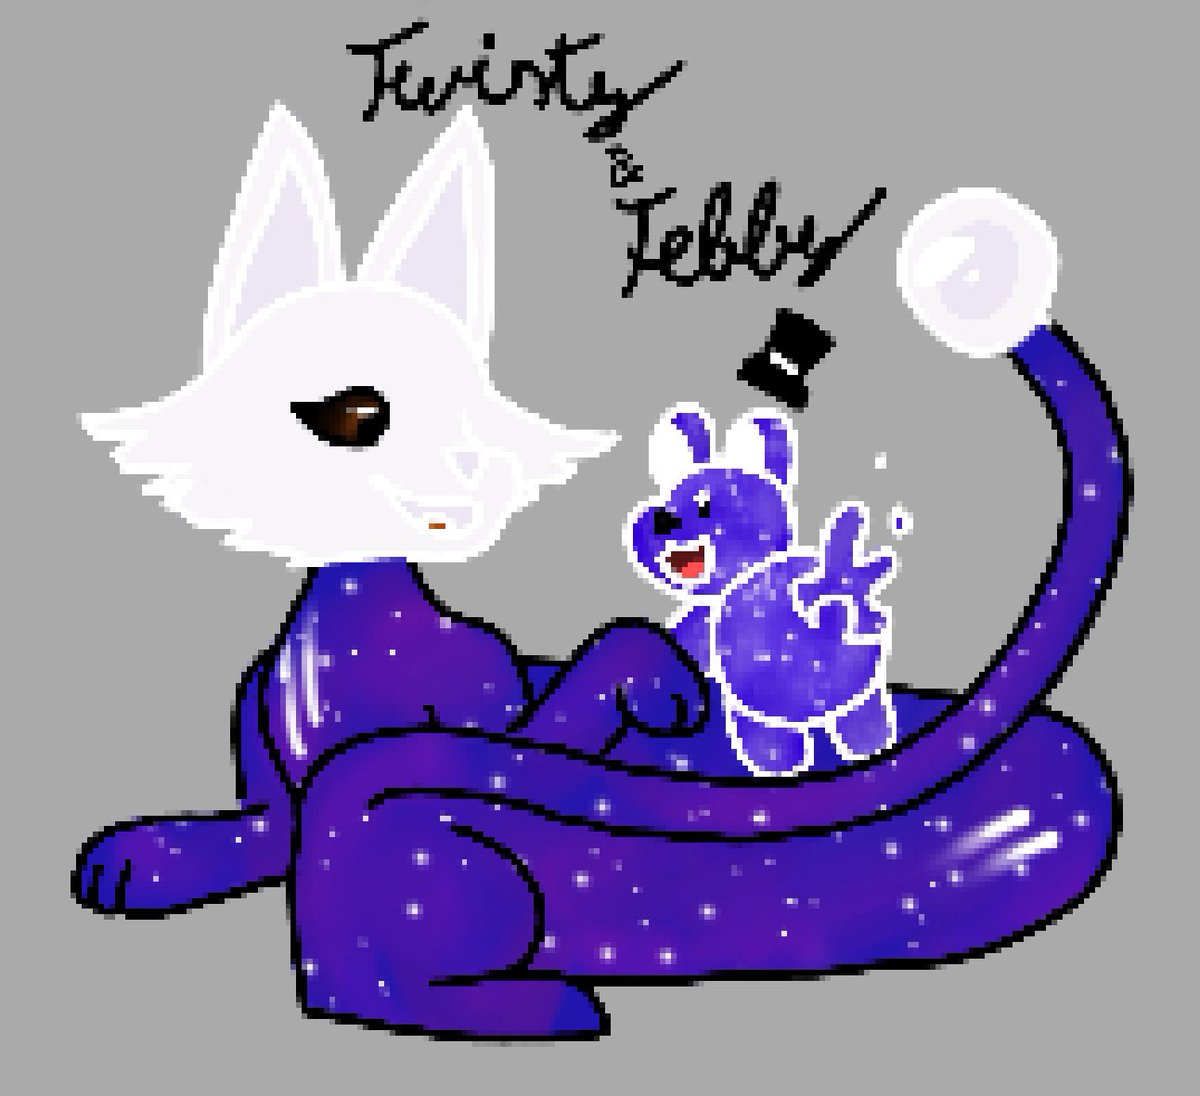 #Daradio figured things out and now I can digitally again, plus I let an urge guide me and I ended up drawing my own galaxy mammal with Febby !